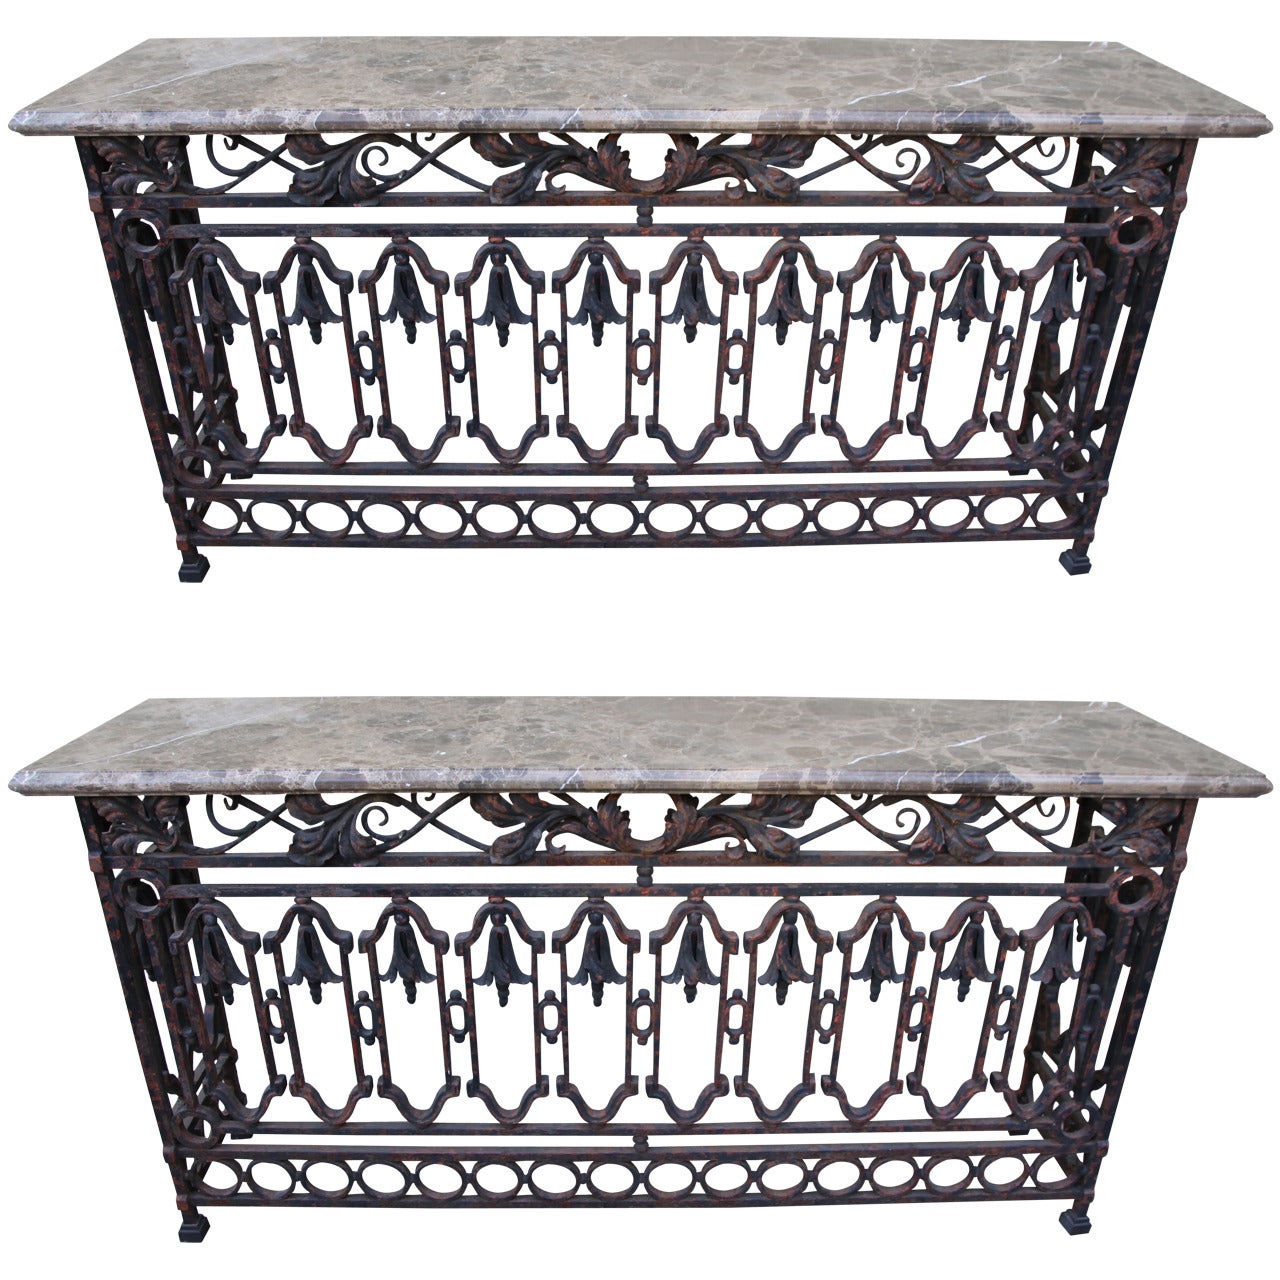 Pair of Spanish Revival Wrought Iron Consoles with Marble Top